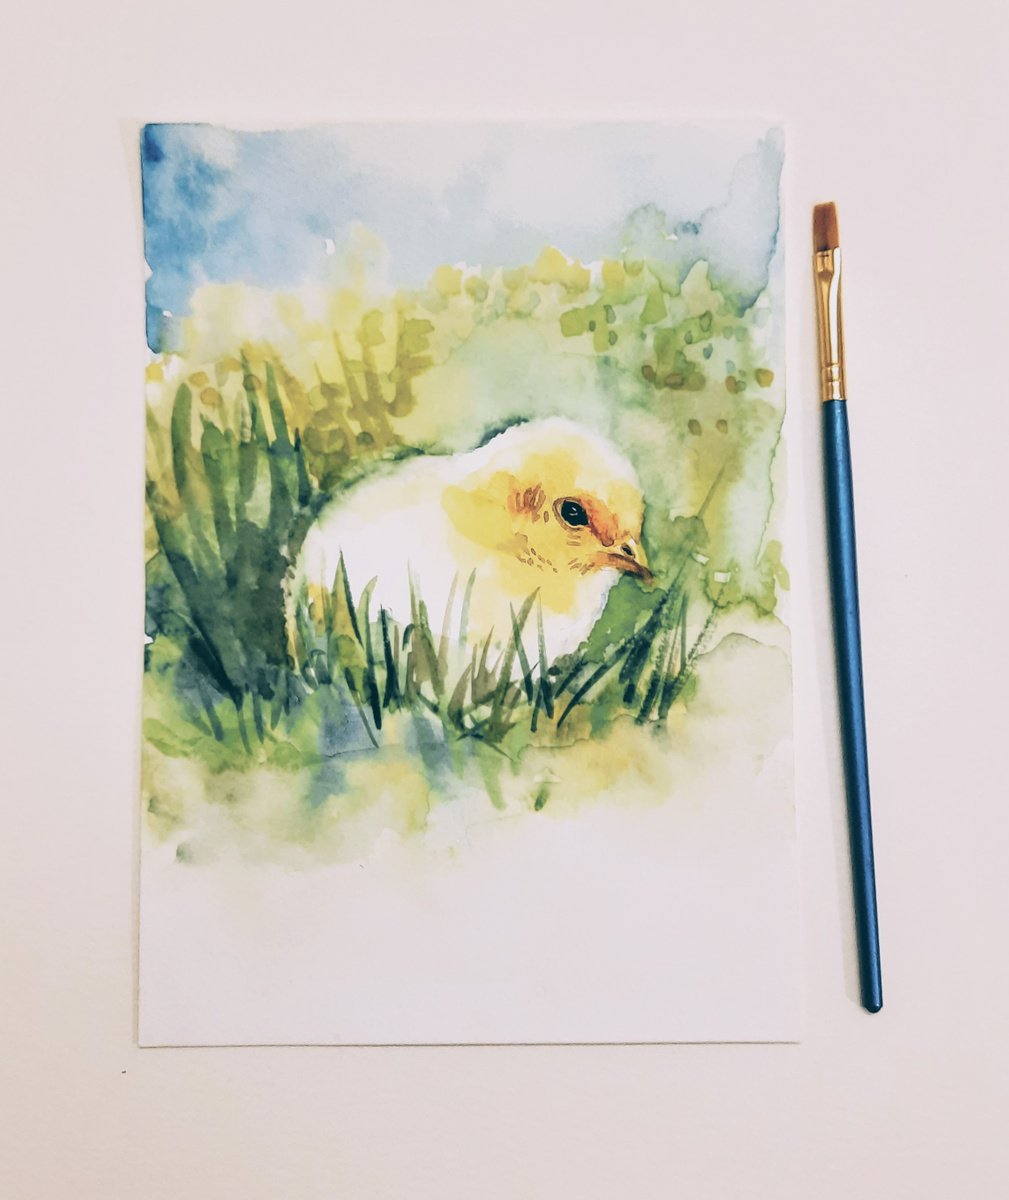 Baby chick original watercolour on paper 5.8x 8.3 by Asha Shenoy